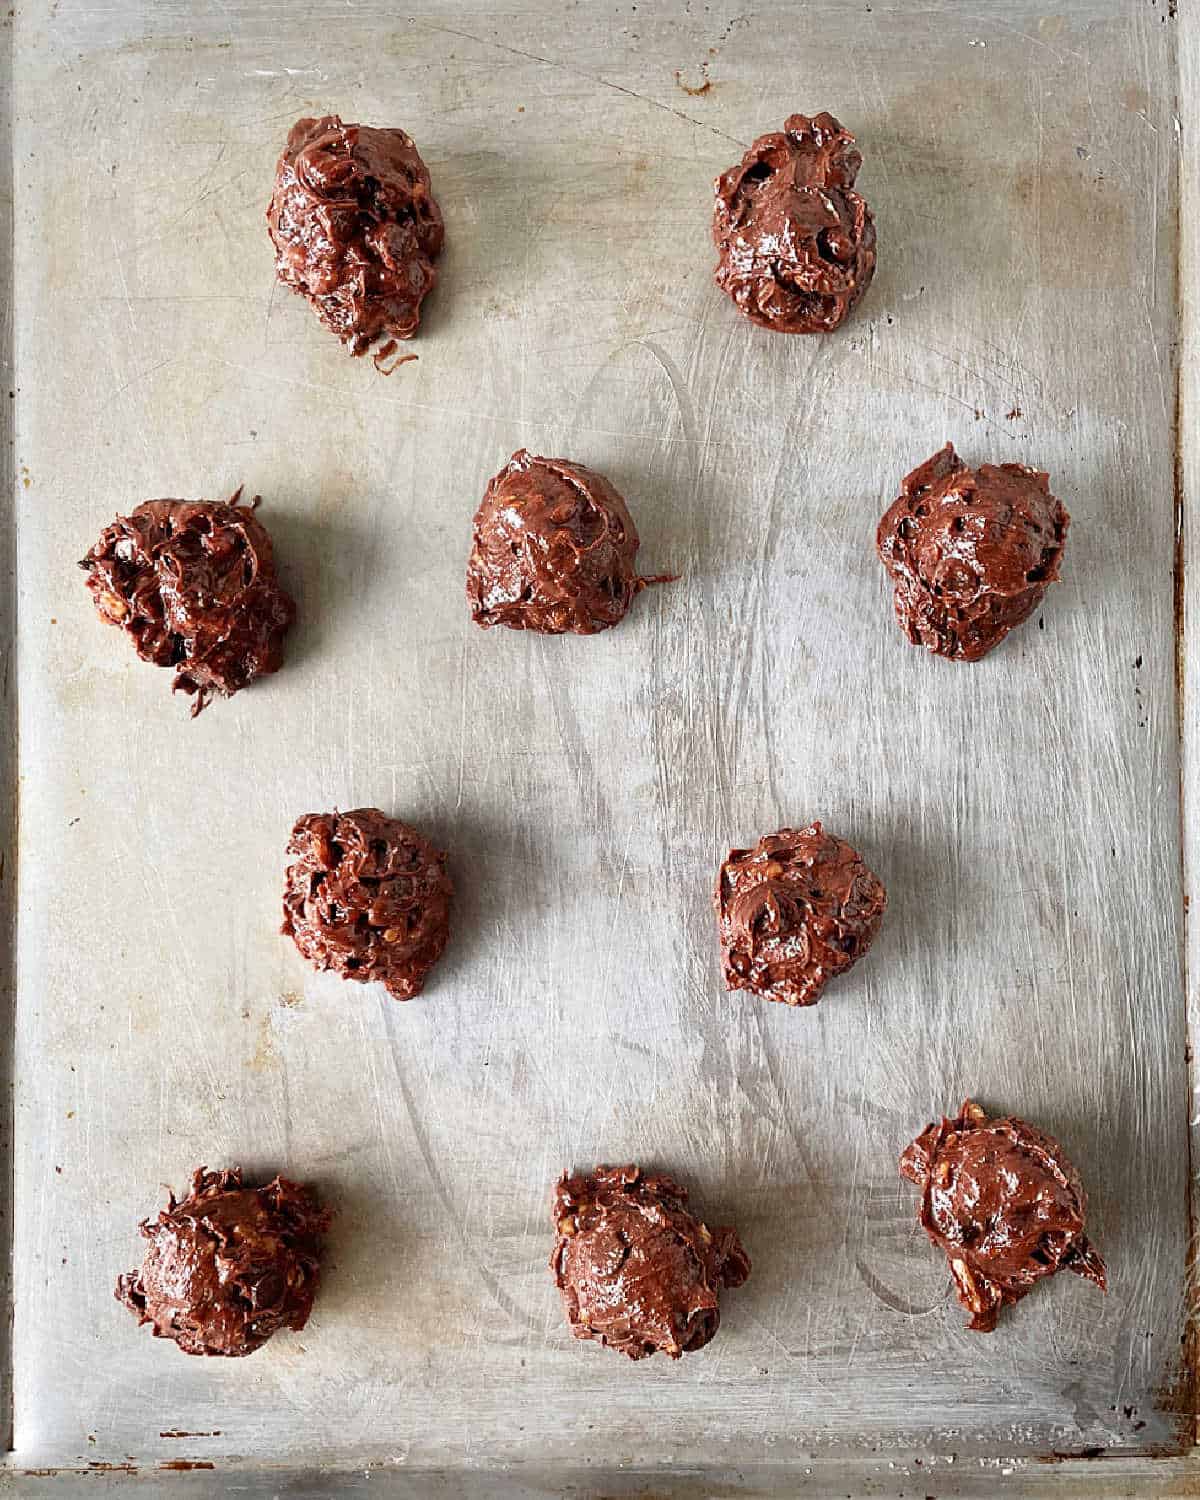 Unbaked chocolate walnut cookie mounds on a metal baking sheet.